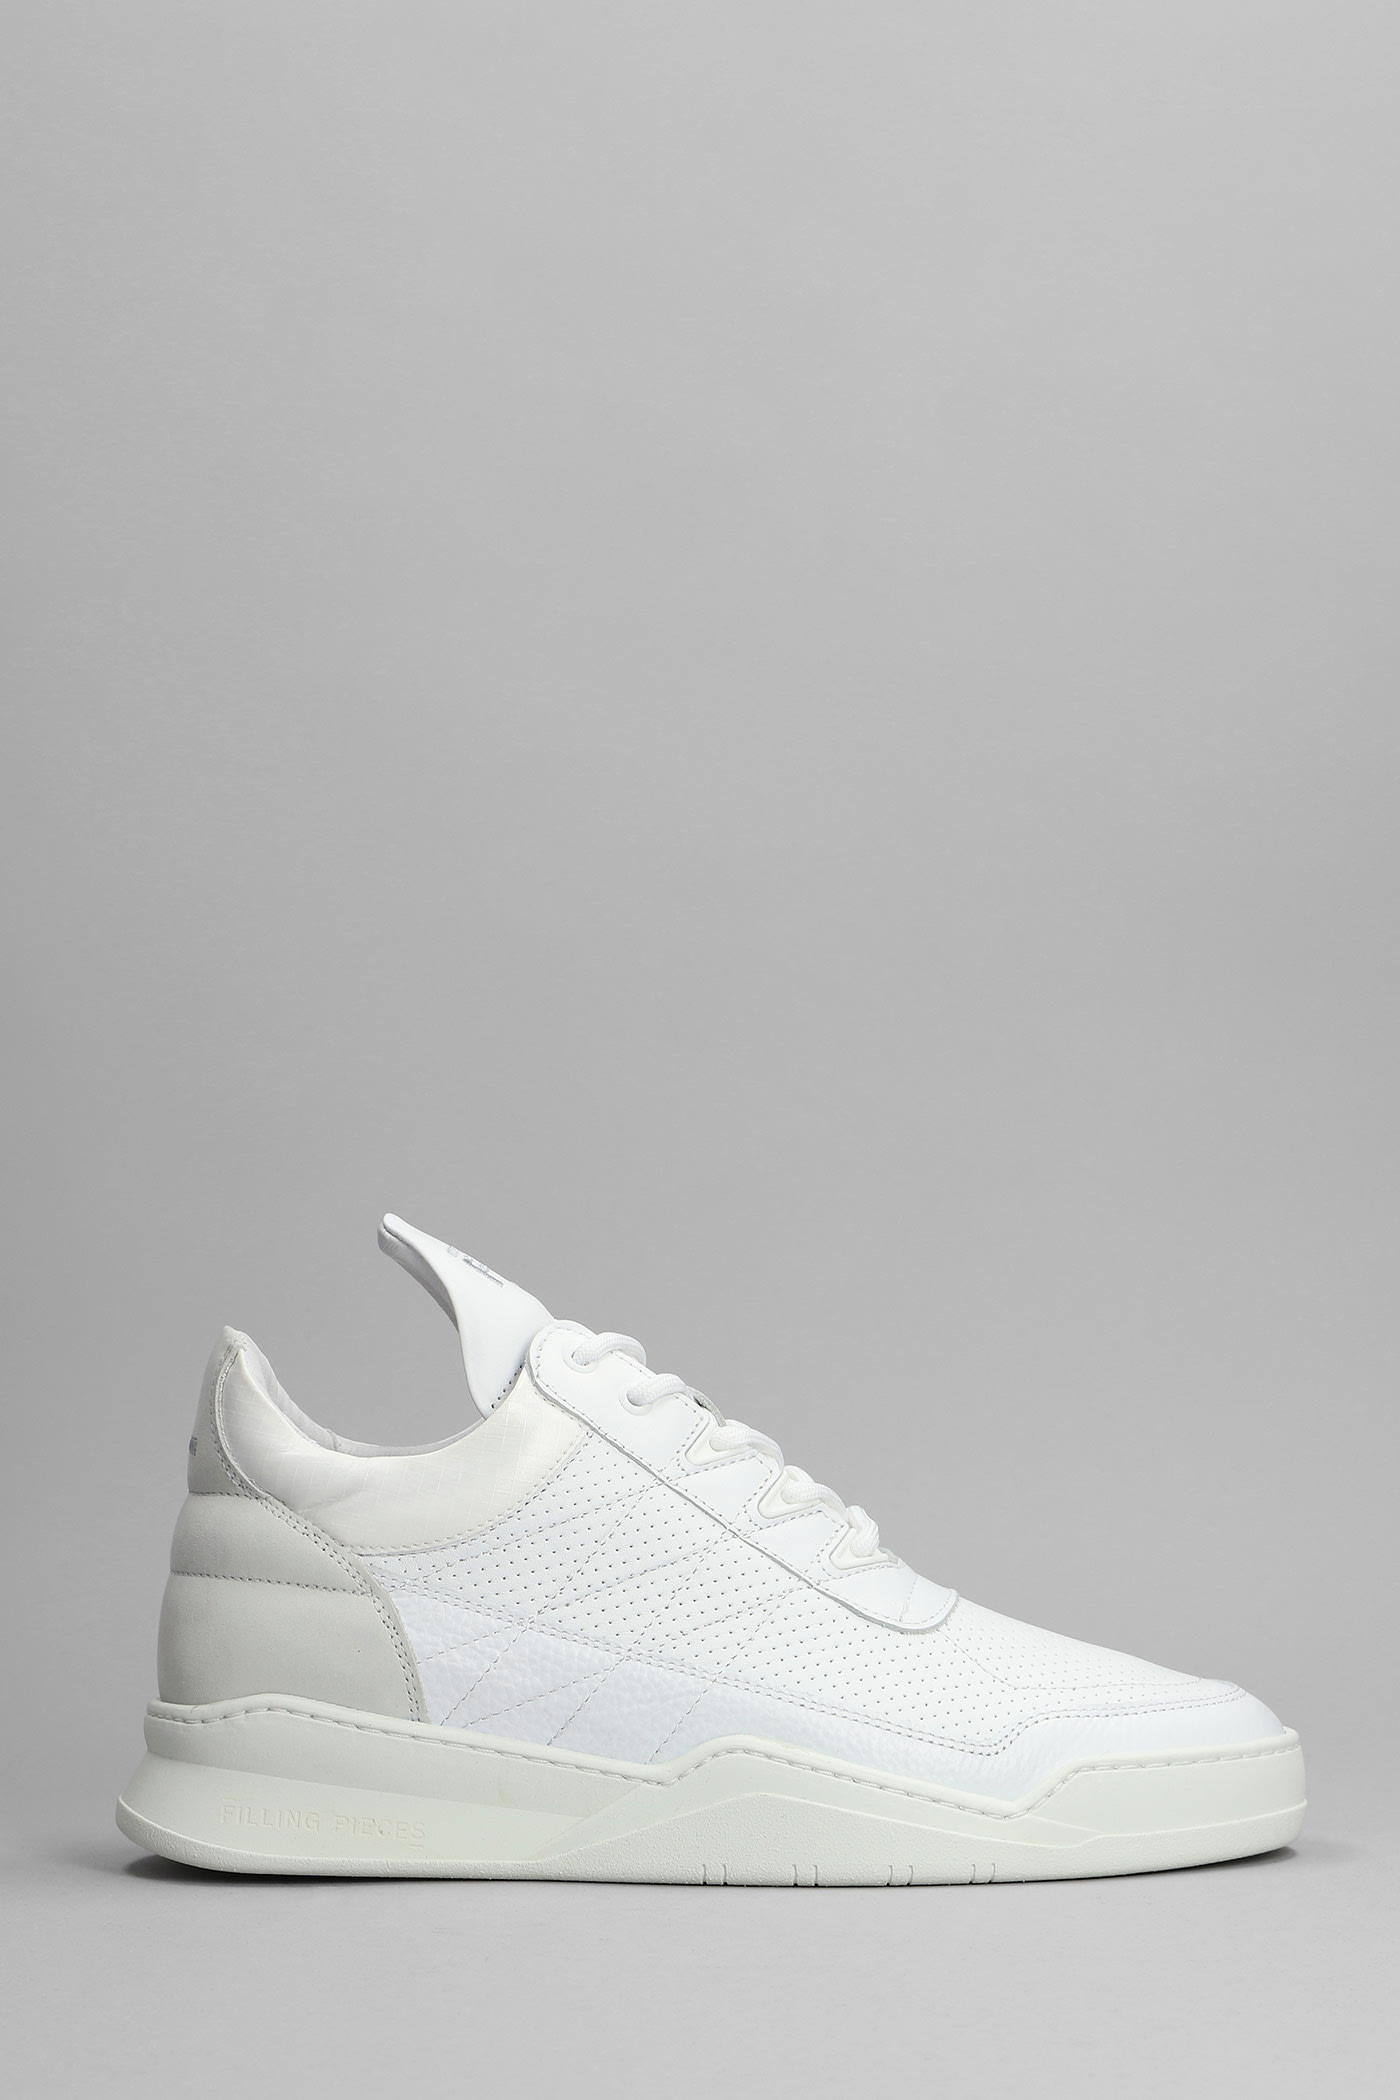 Filling Pieces Sneakers In White Leather